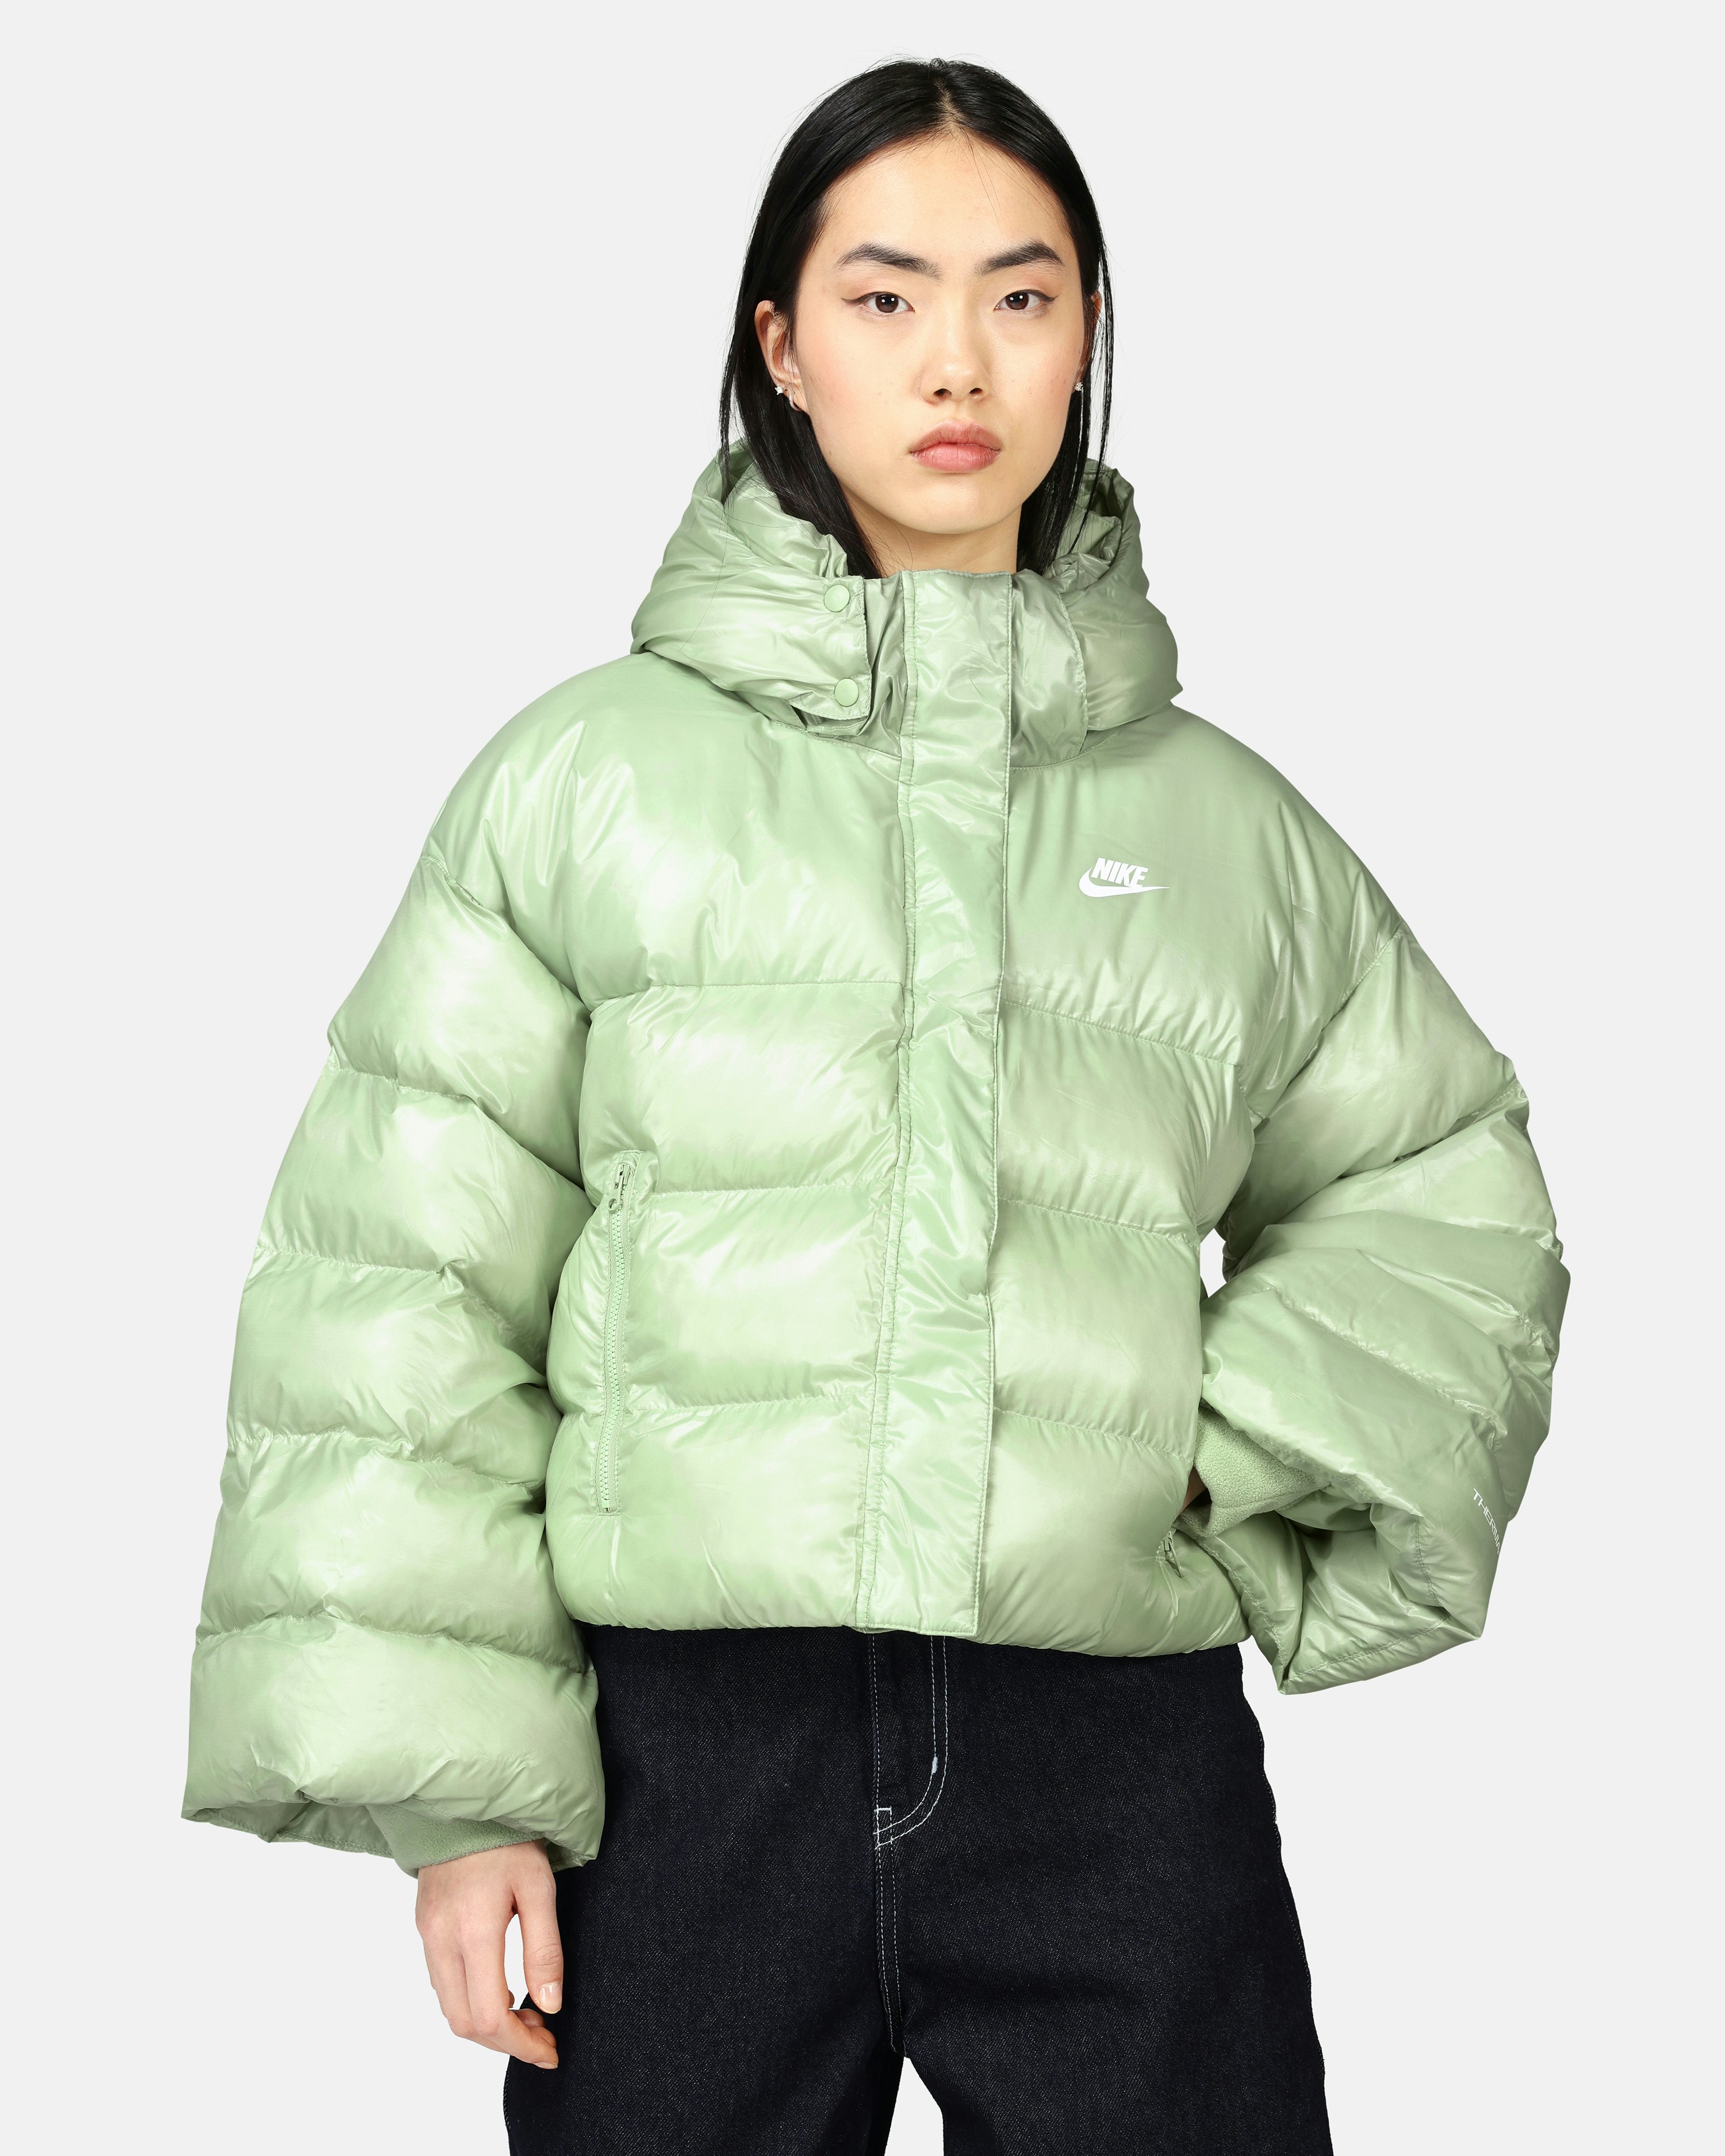 NIKE THERMA FIT Down Fill Puffer Jacket Size S (Dh4079 222) Green